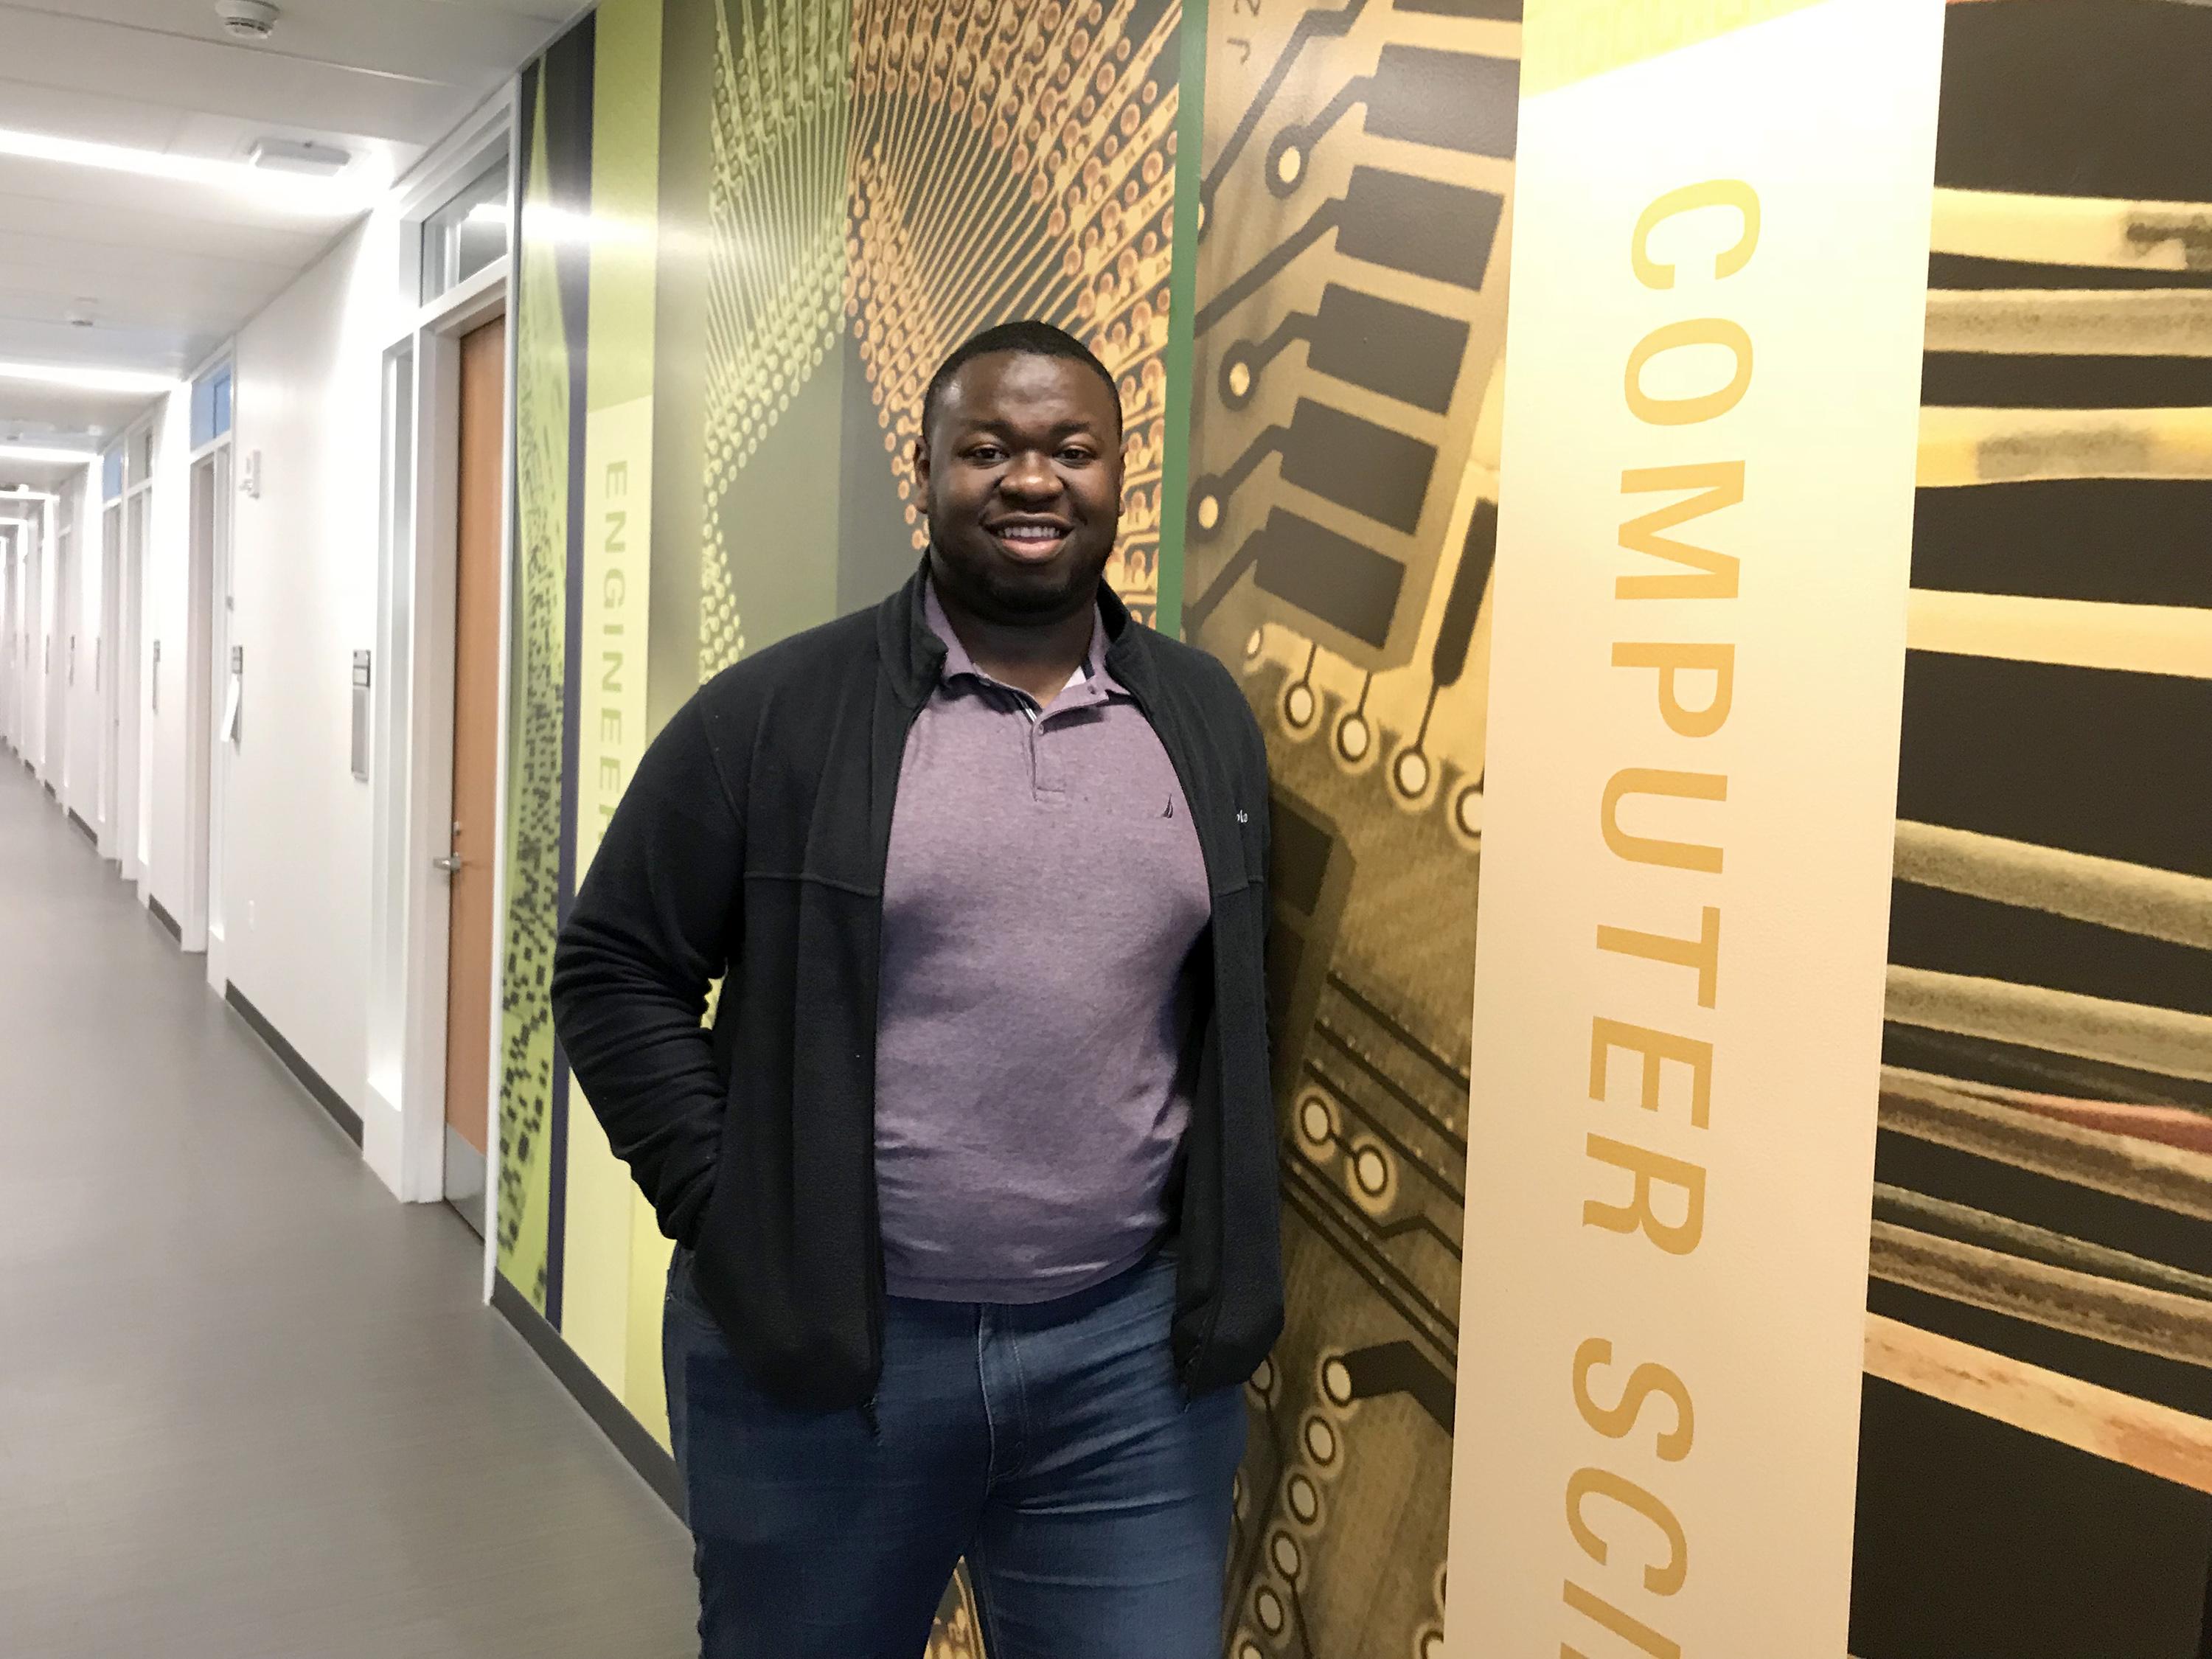 Kingsley Ibezim in front of a mural on computer science and other fields in the Shineman Center